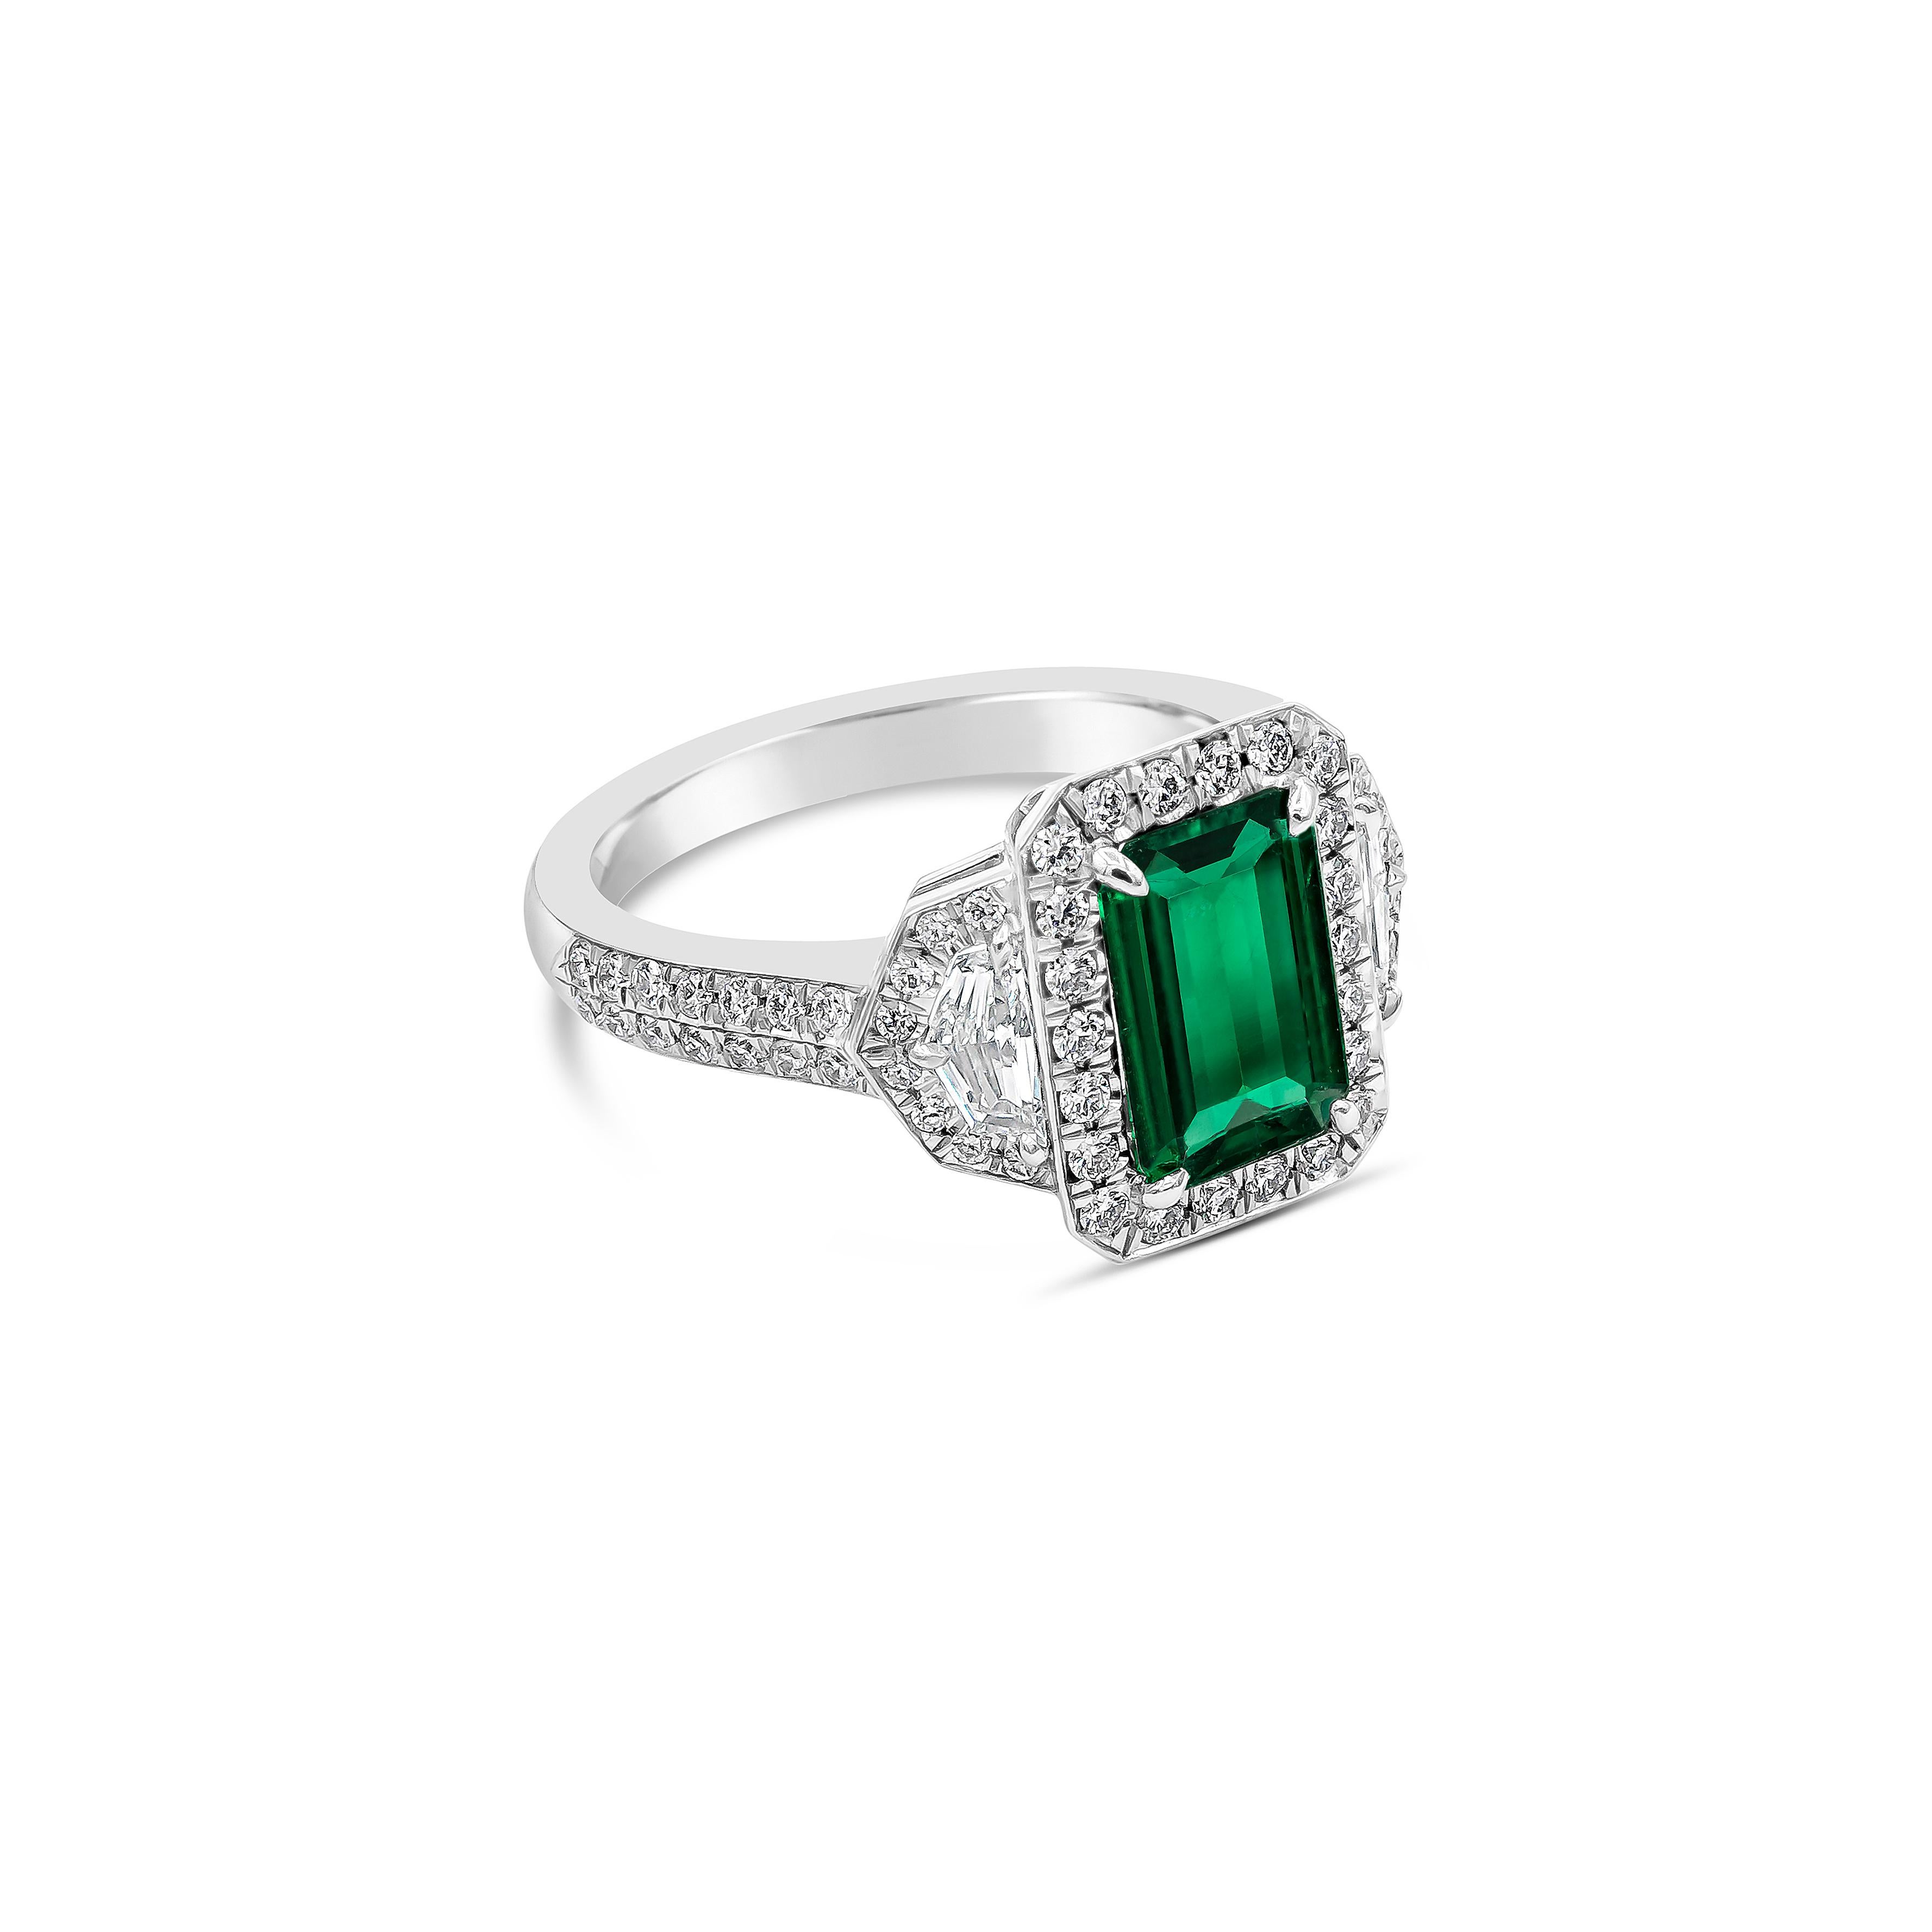 Showcases an emerald cut Colombian green emerald weighing 1.16 carats, flanked by epaulette diamonds weighing 0.28 carats total. Surrounded by a single row of round diamonds on an accented platinum band. Accent diamonds weigh 0.44 carats total.

